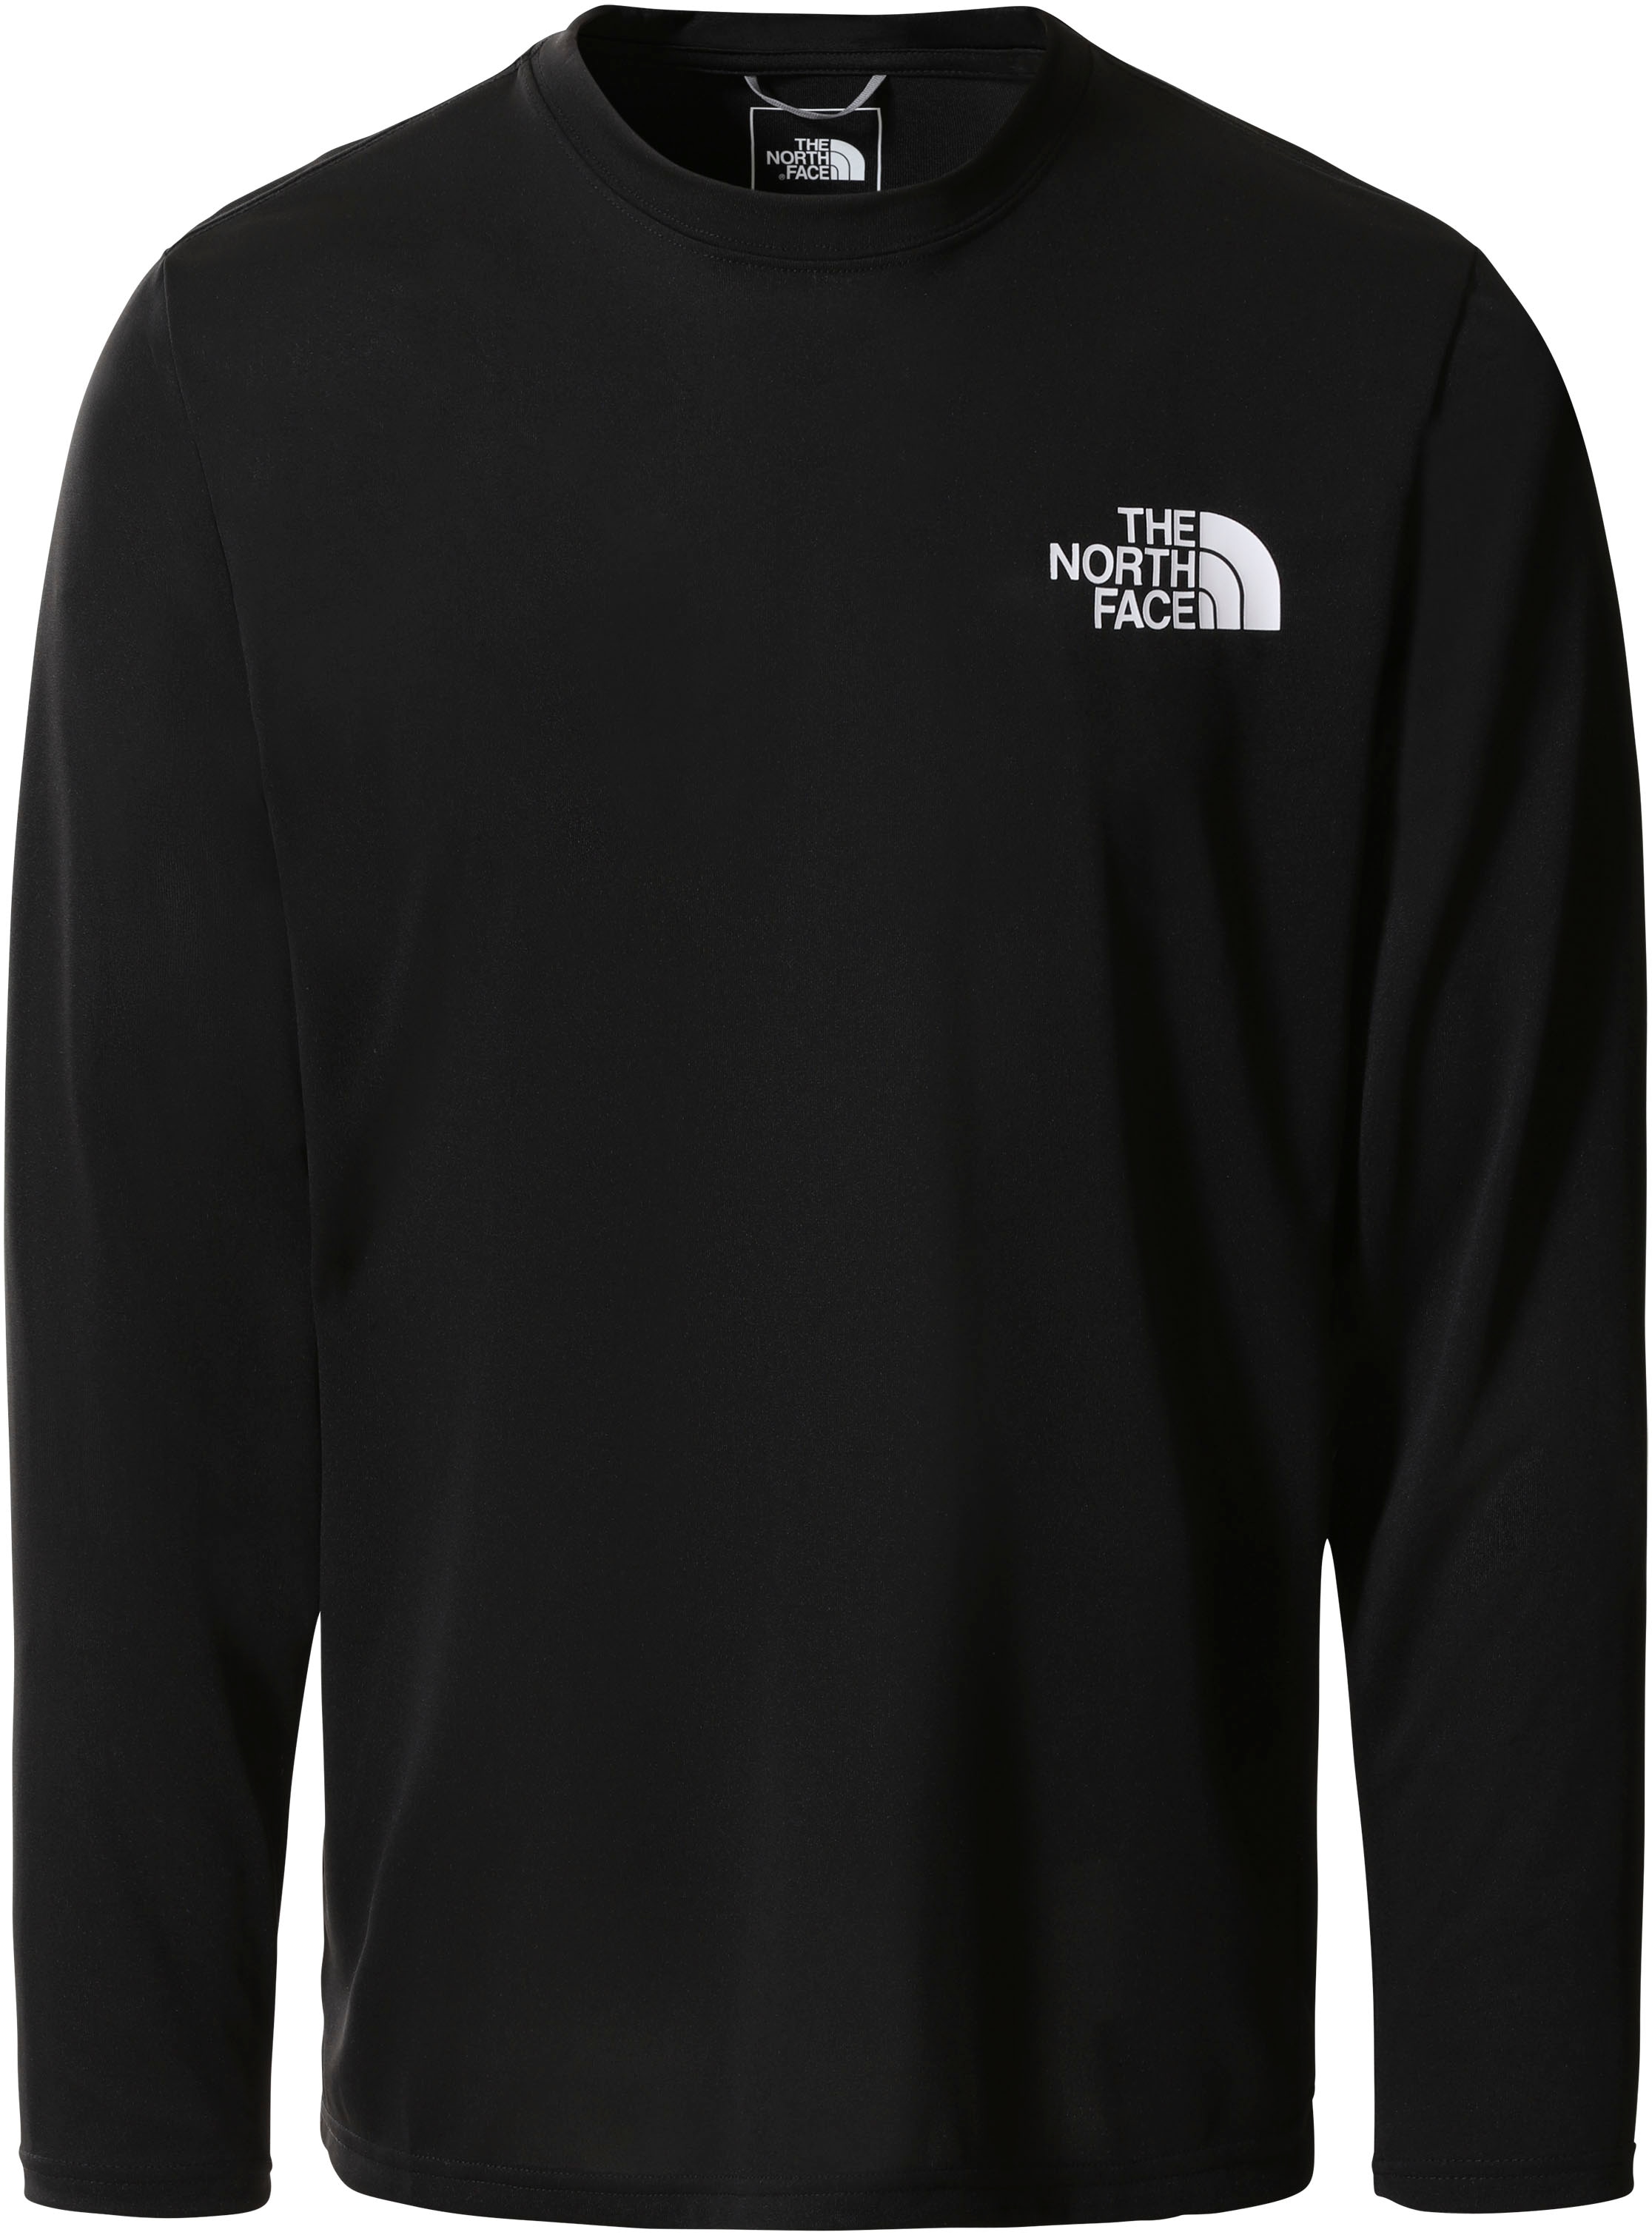 The North Face Langarmshirt »M REAXION AMP L/S CREW«